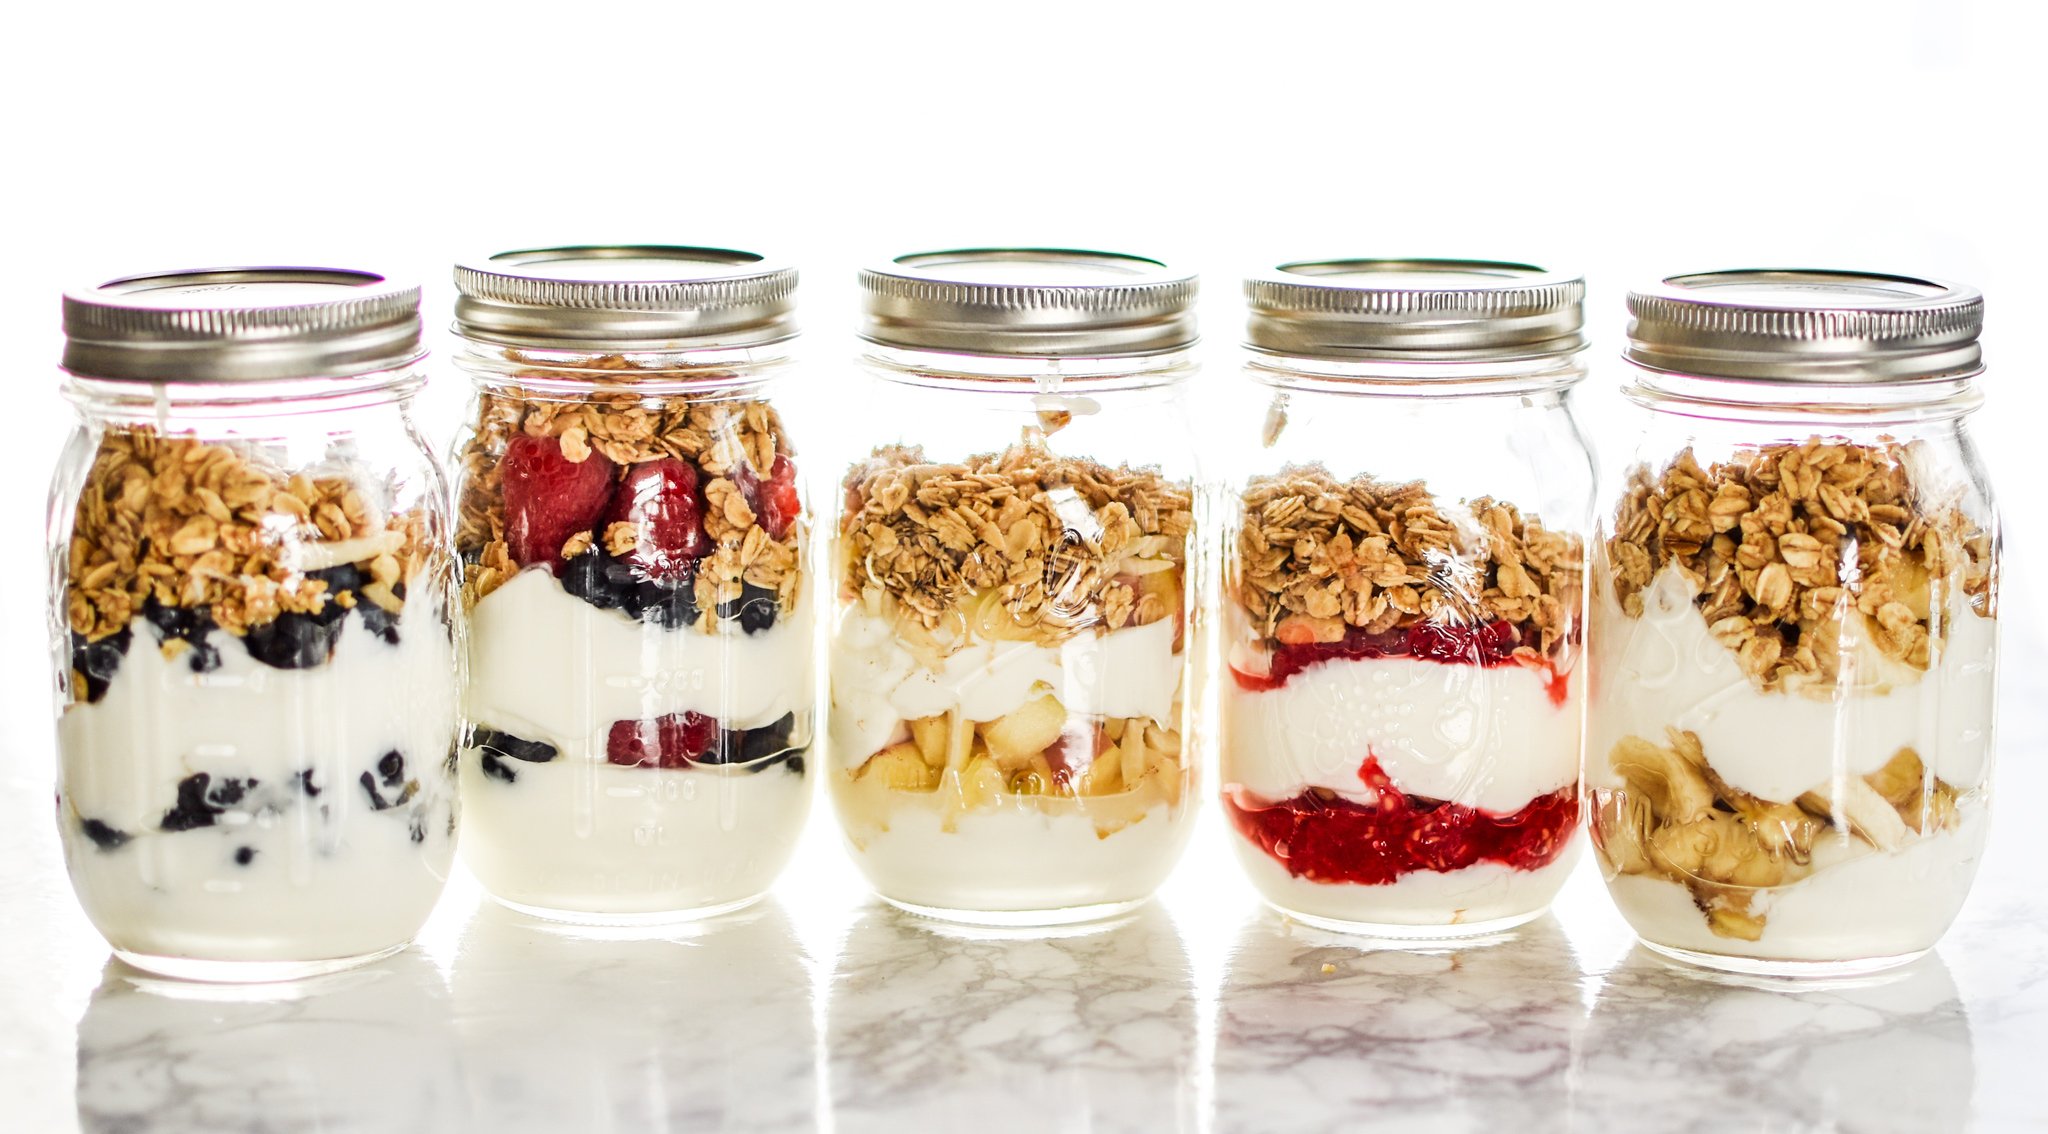 5 Make-Ahead Fruit & Greek Yogurt Parfait Ideas to Try for Breakfast - Greek yogurt with just a hint of sweetness, layered with fruits and topped with granola, 5 WAYS!! Prep ahead and grab it on your way out the door tomorrow! - ProjectMealPlan.com